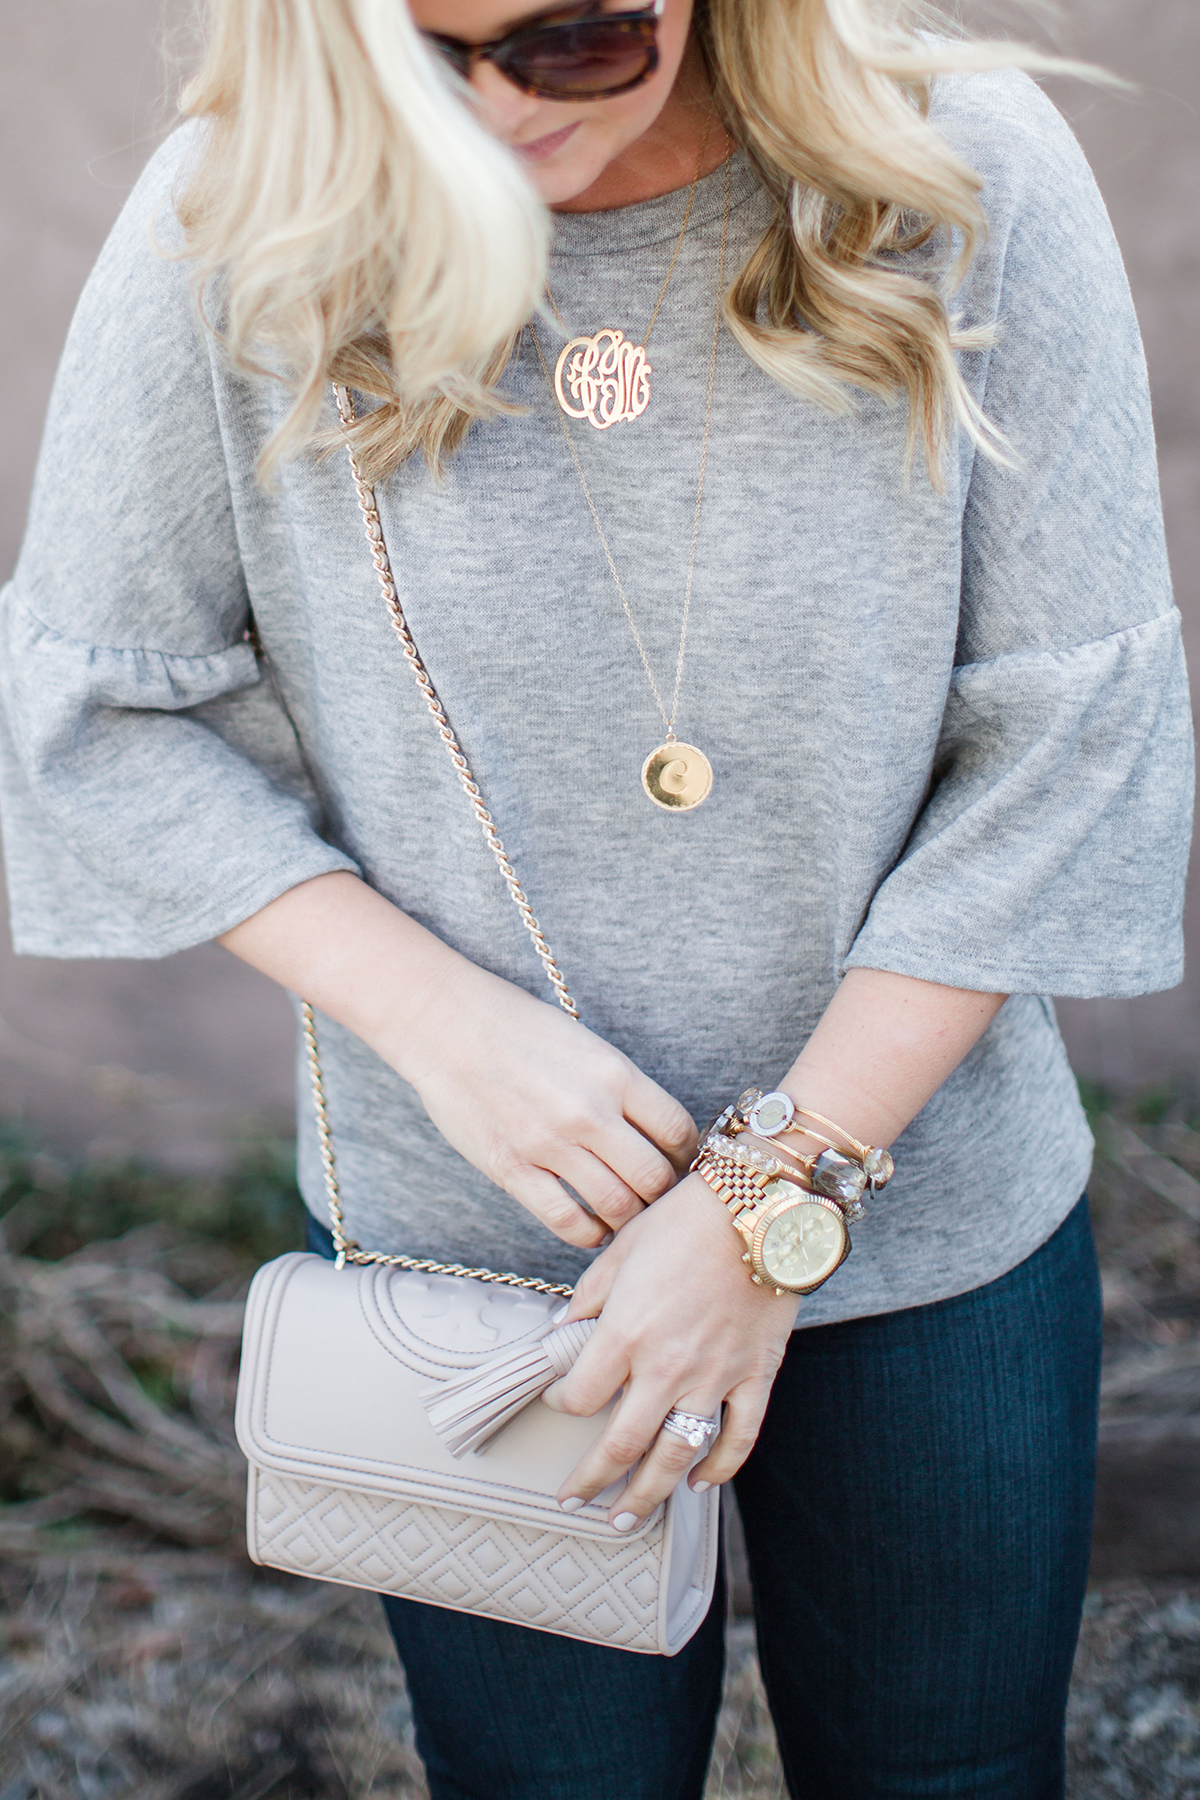 grey ruffle sleeve top, grey top with bell sleeves, grey top, grey sweater, bell sleeve top, date night outfit, spring outfit inspiration, outfit inspiration, southern style, southern blogger, greenville blogger